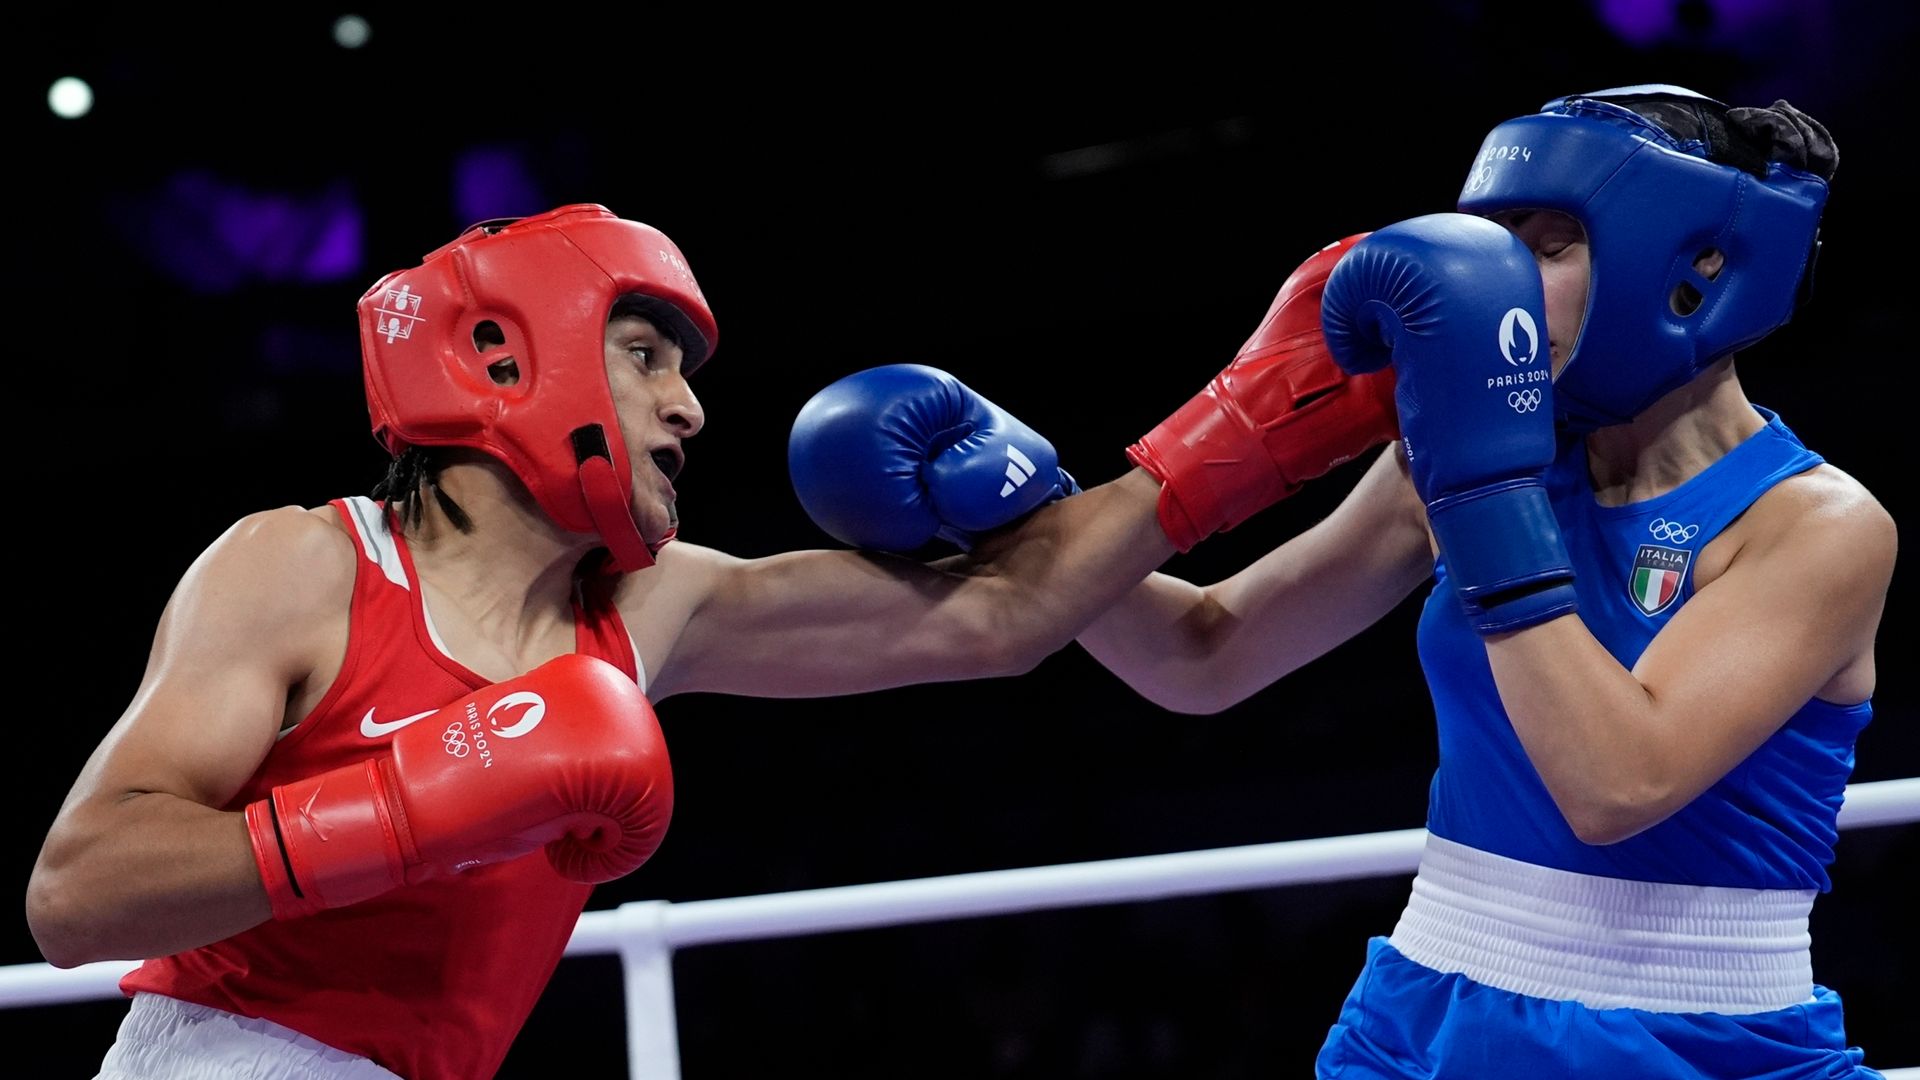 Olympics should reintroduce gender testing in wake of boxing row - UN adviser